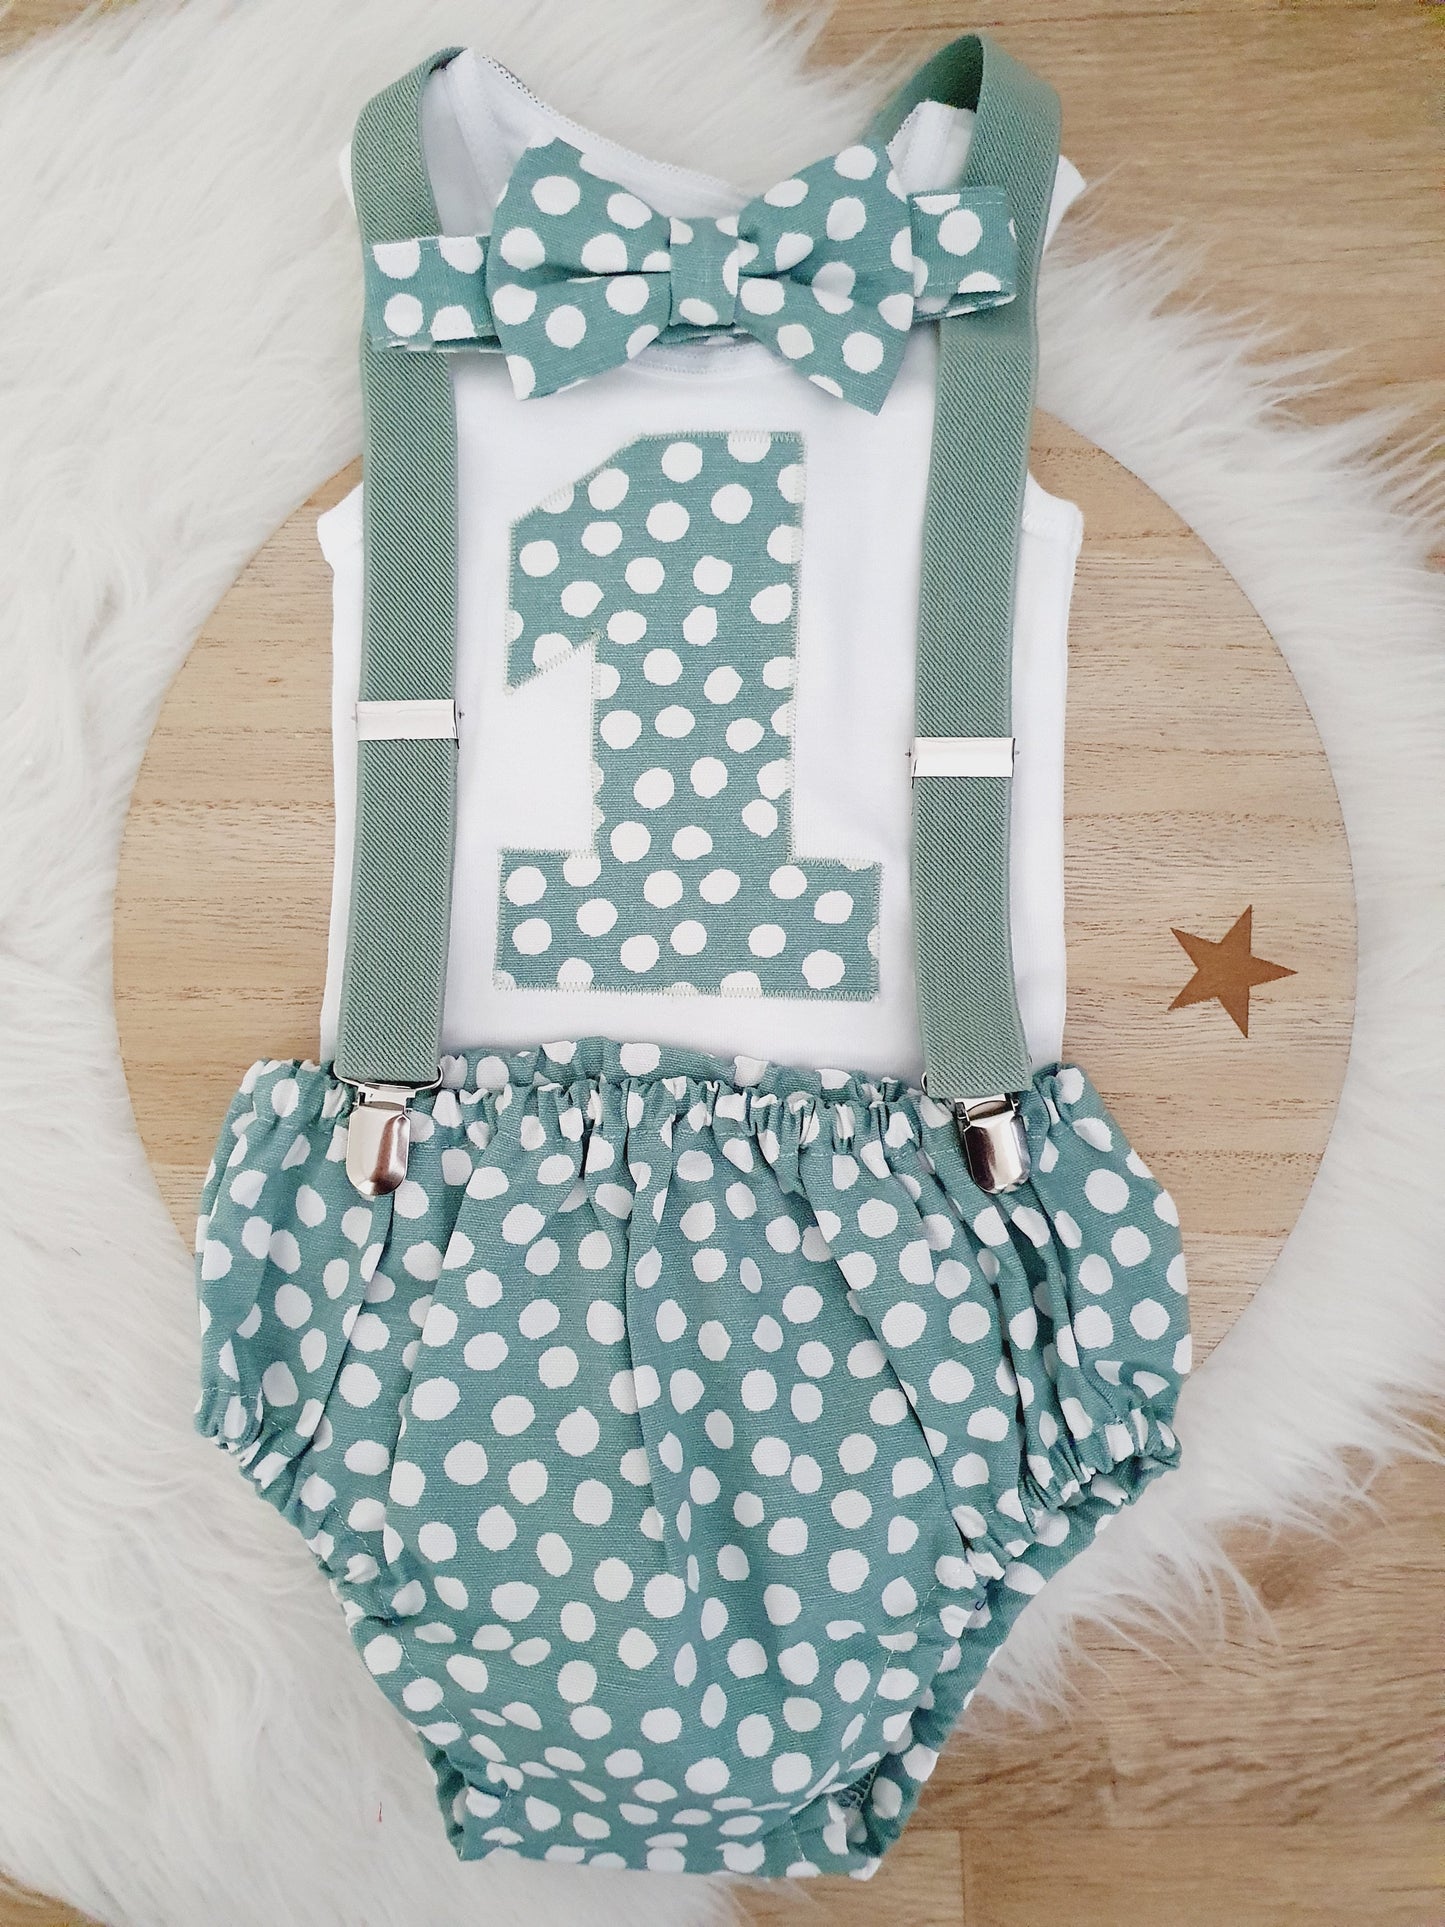 Sage Boys 1st Birthday - Cake Smash Outfit - Baby Boys First Birthday Photoshoot Clothing - Size 1, Nappy Cover, Tie, Suspenders & Singlet Set, SAGE AND WHITE DOTS